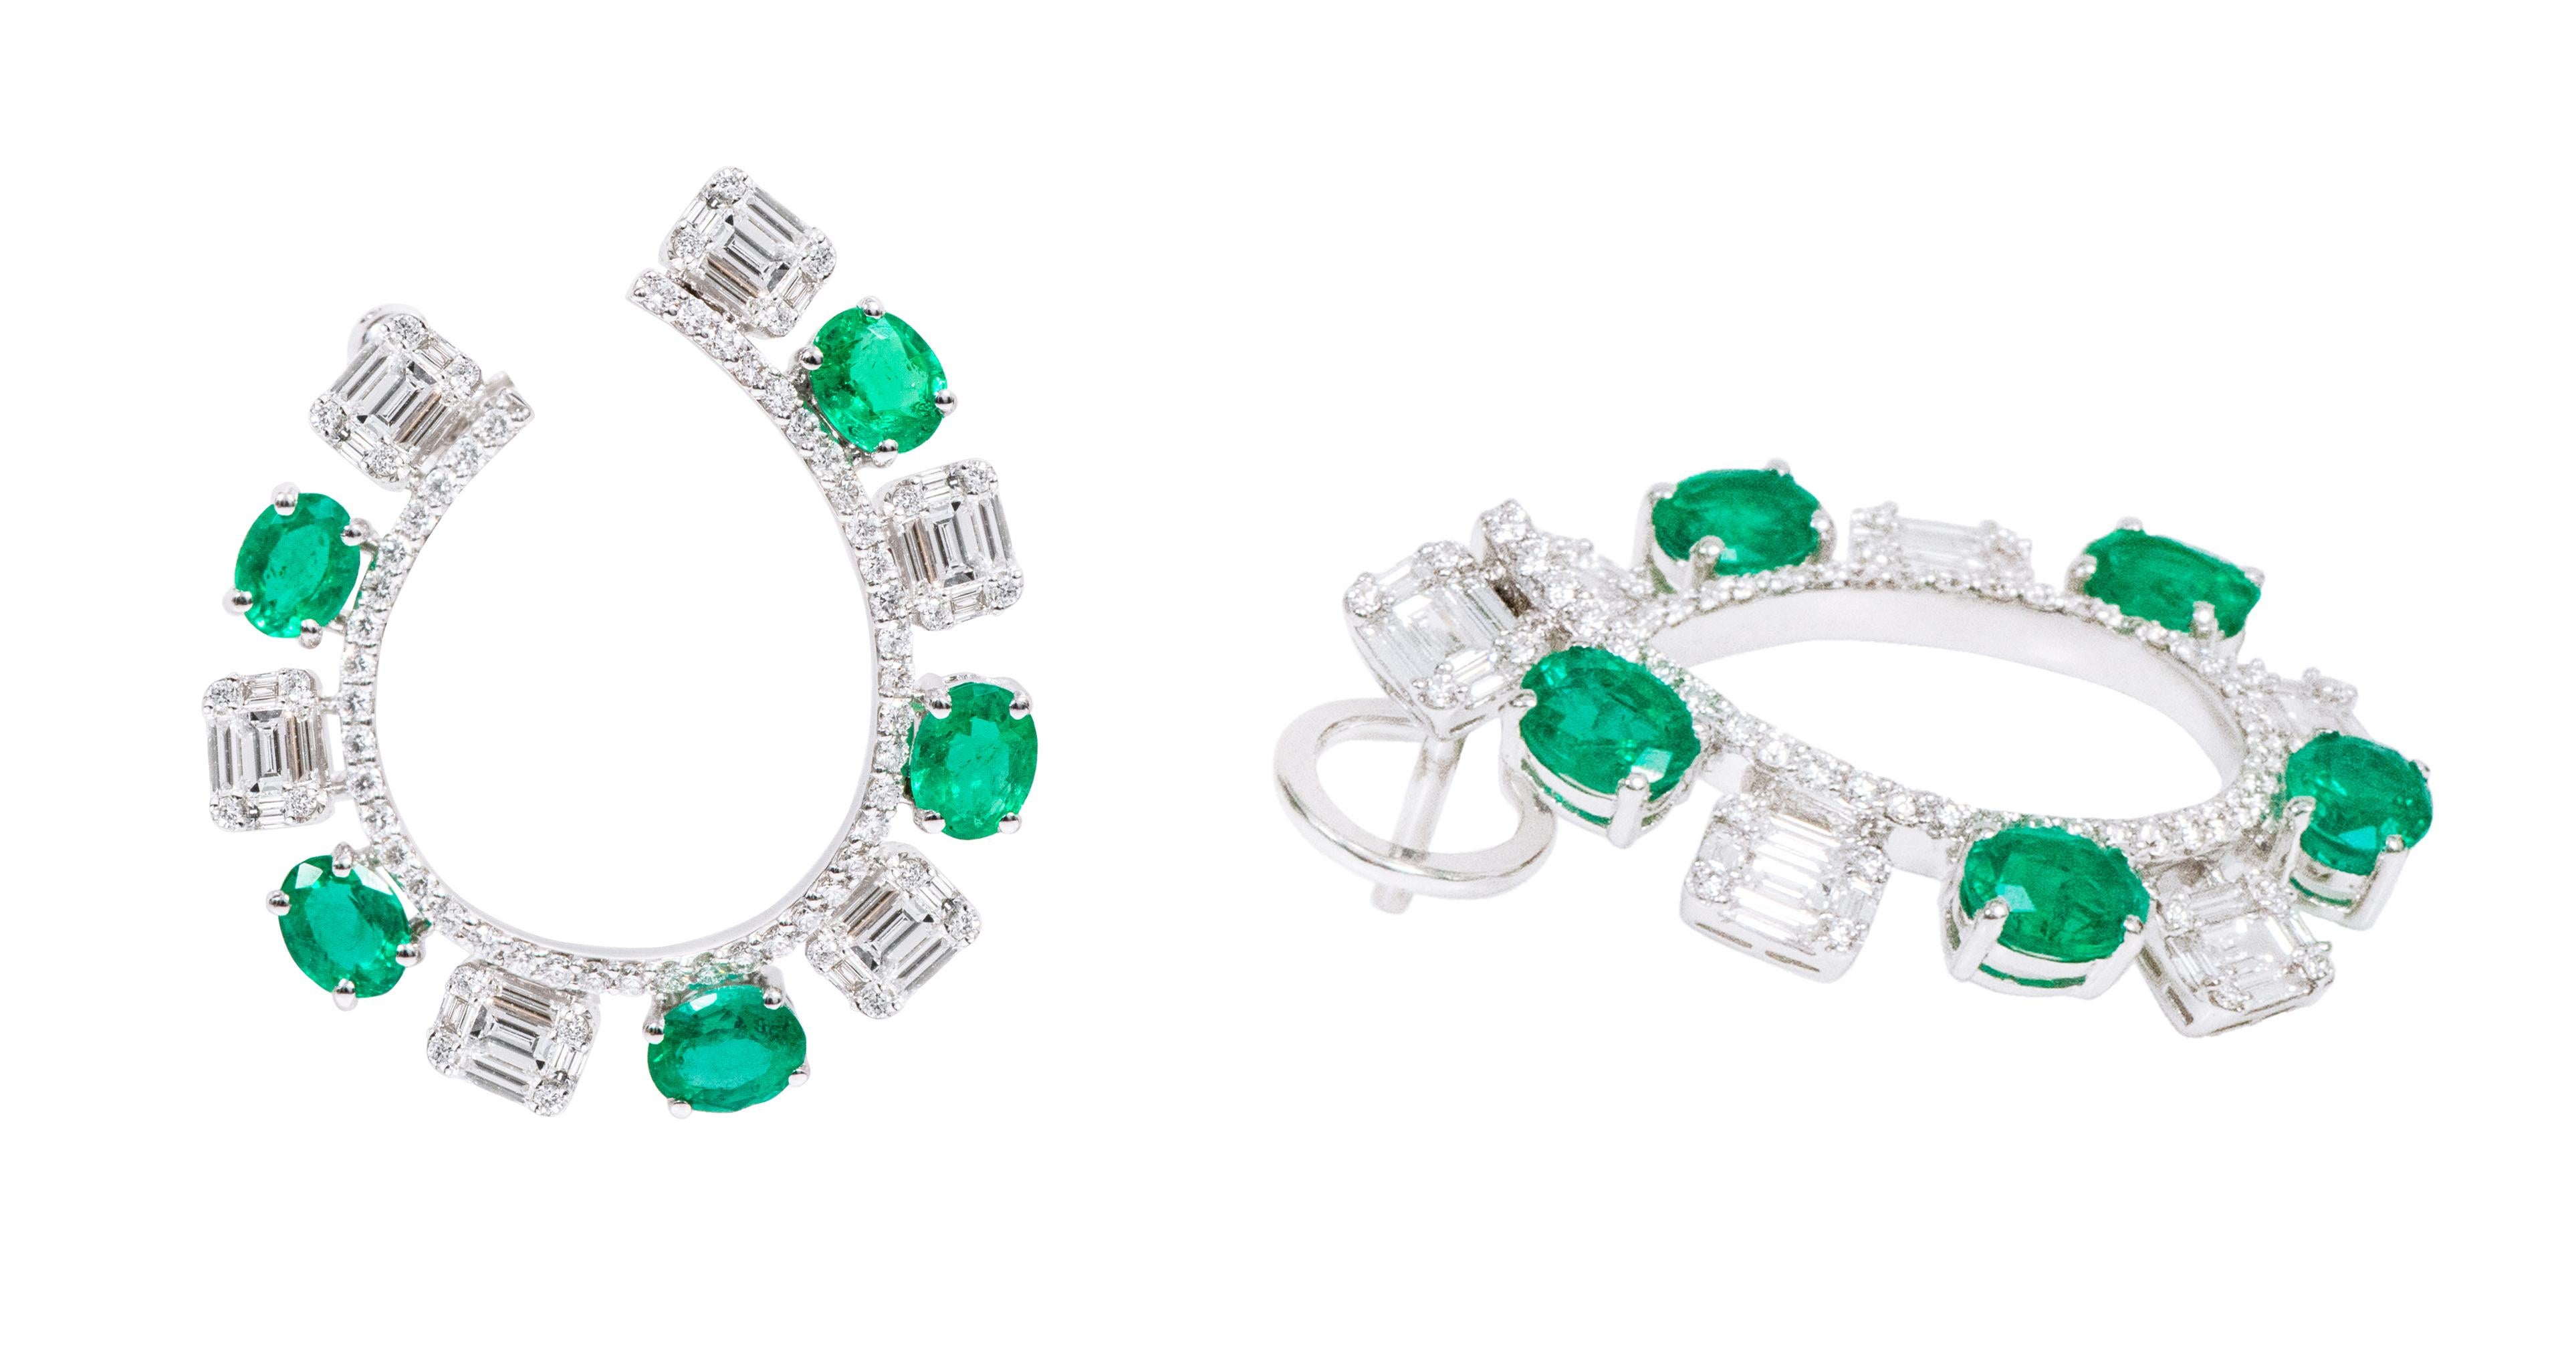 Contemporary 18 Karat White Gold 5.15 Carat Diamond and Natural Emerald Modified Hoop Earring For Sale